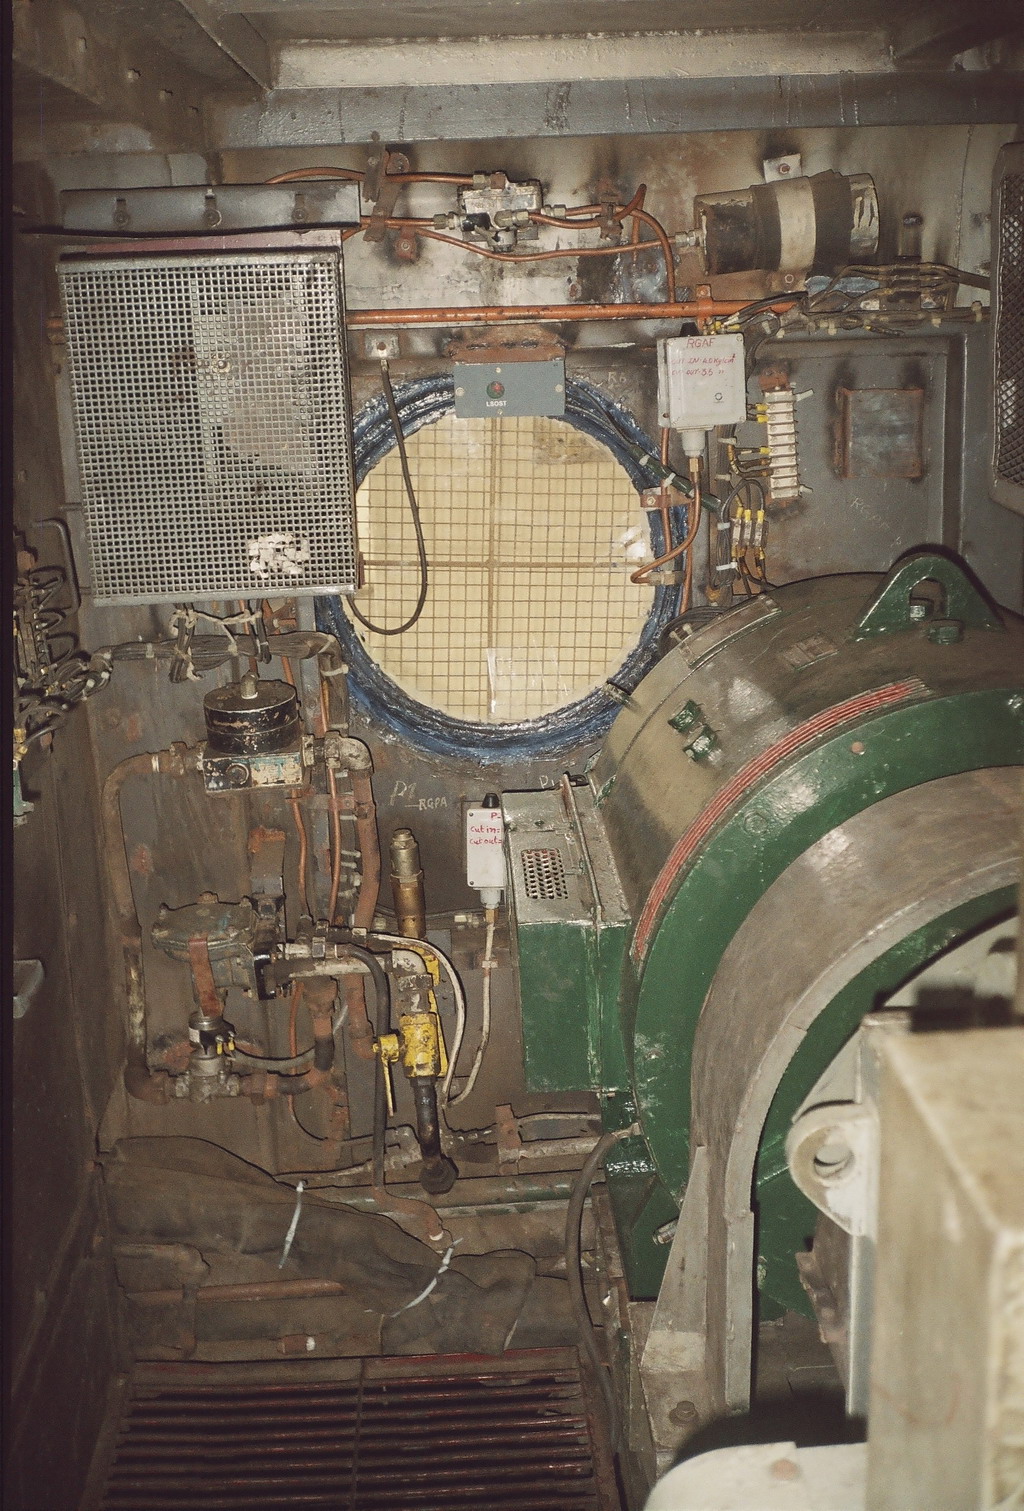 Motor-alternator set provided in WCAM-1 locos. The MA set is the green machine to the right. The silver box to the top left is the FRG (Frequency Regulator).